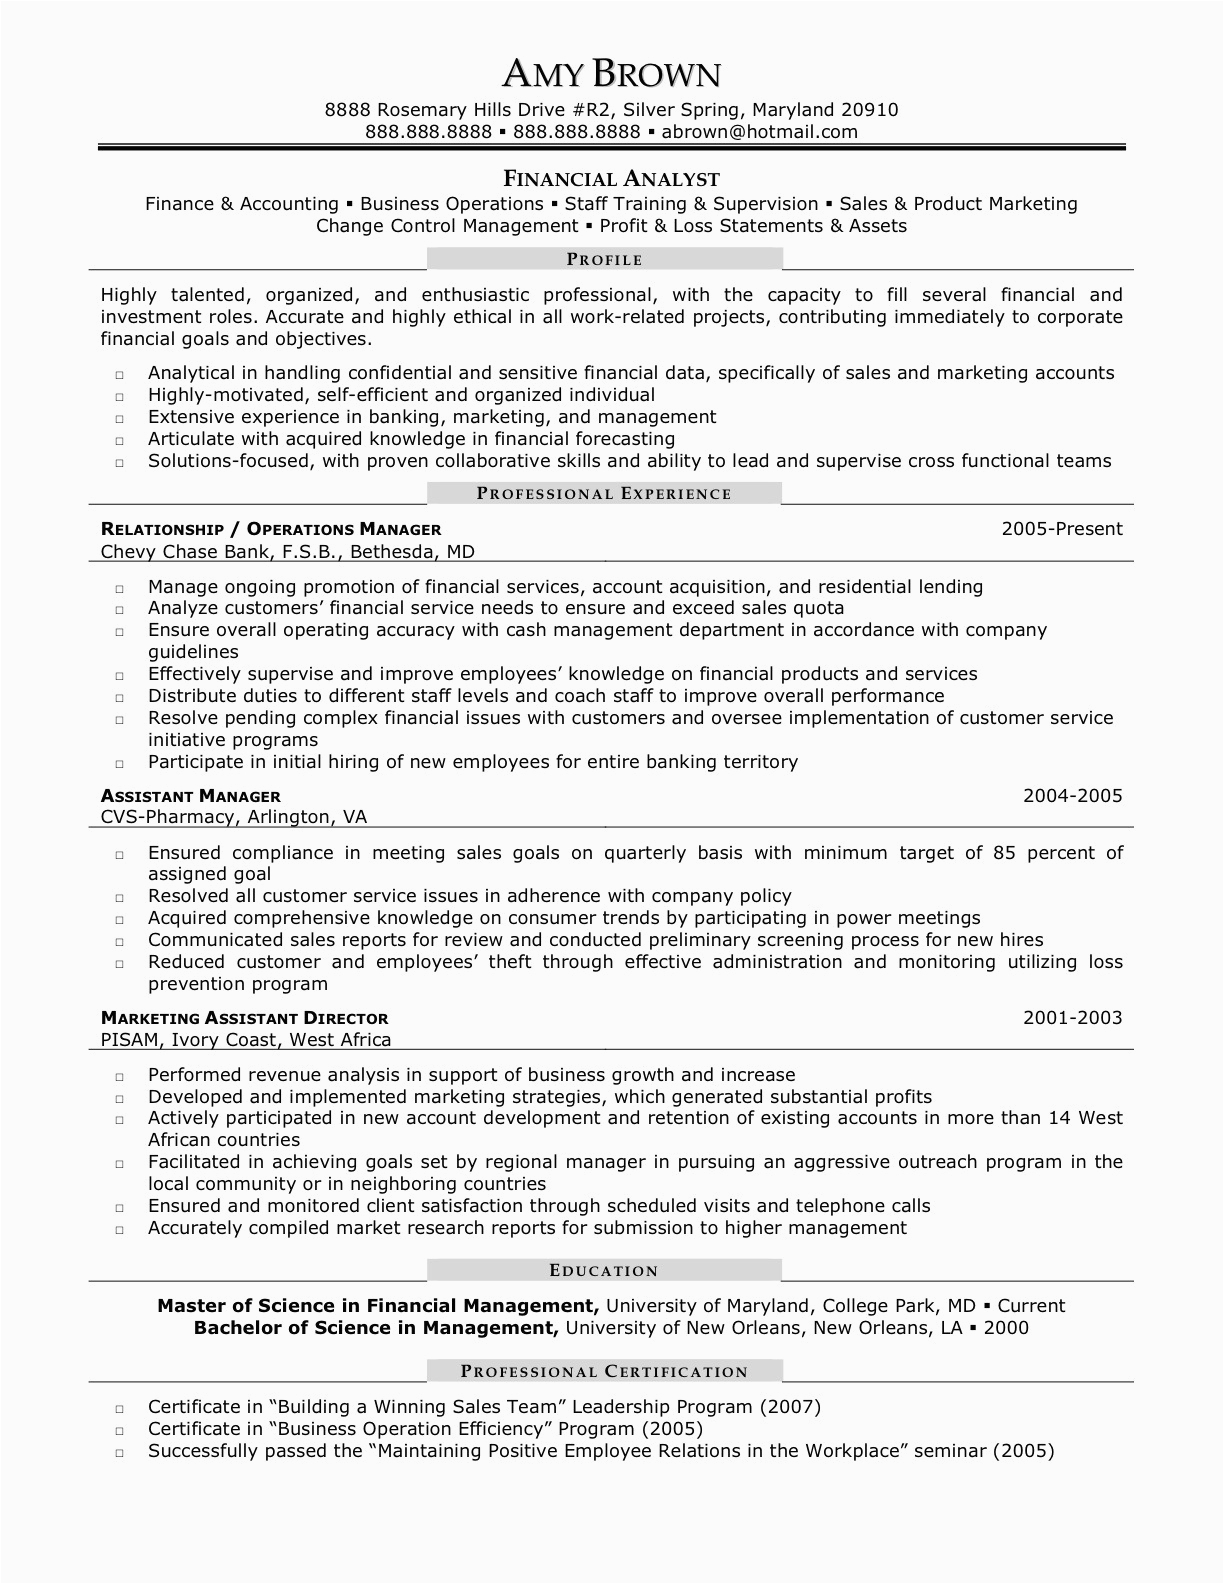 Sample Resumes for Financial Entry Level Positions Entry Level Financial Analyst Resume